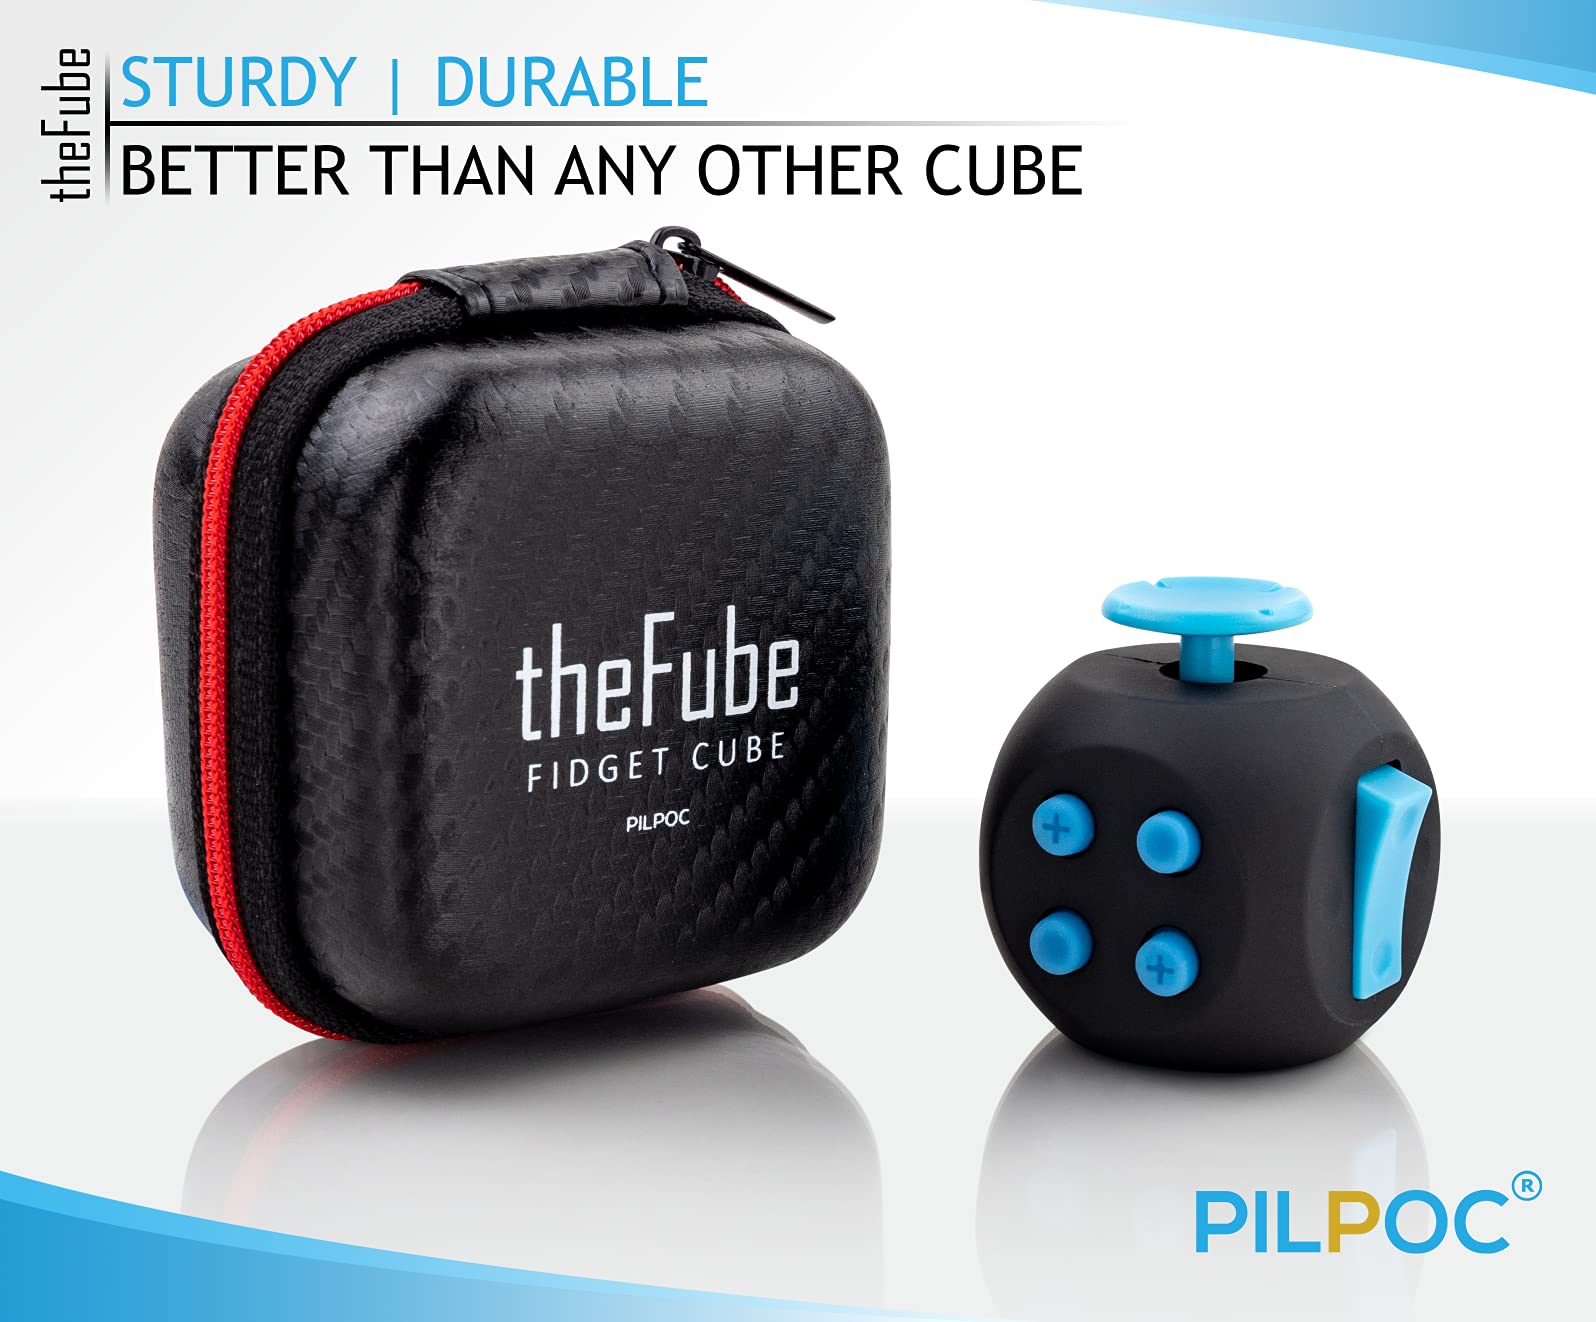 PILPOC theFube Fidget Cube - Premium Quality Fidget Cube with Exclusive Protective Case, Stress Cube, Stress Relieve Toy, Reduce Anxiety, for ADHD, OCD, Autism (Black & Light Blue)